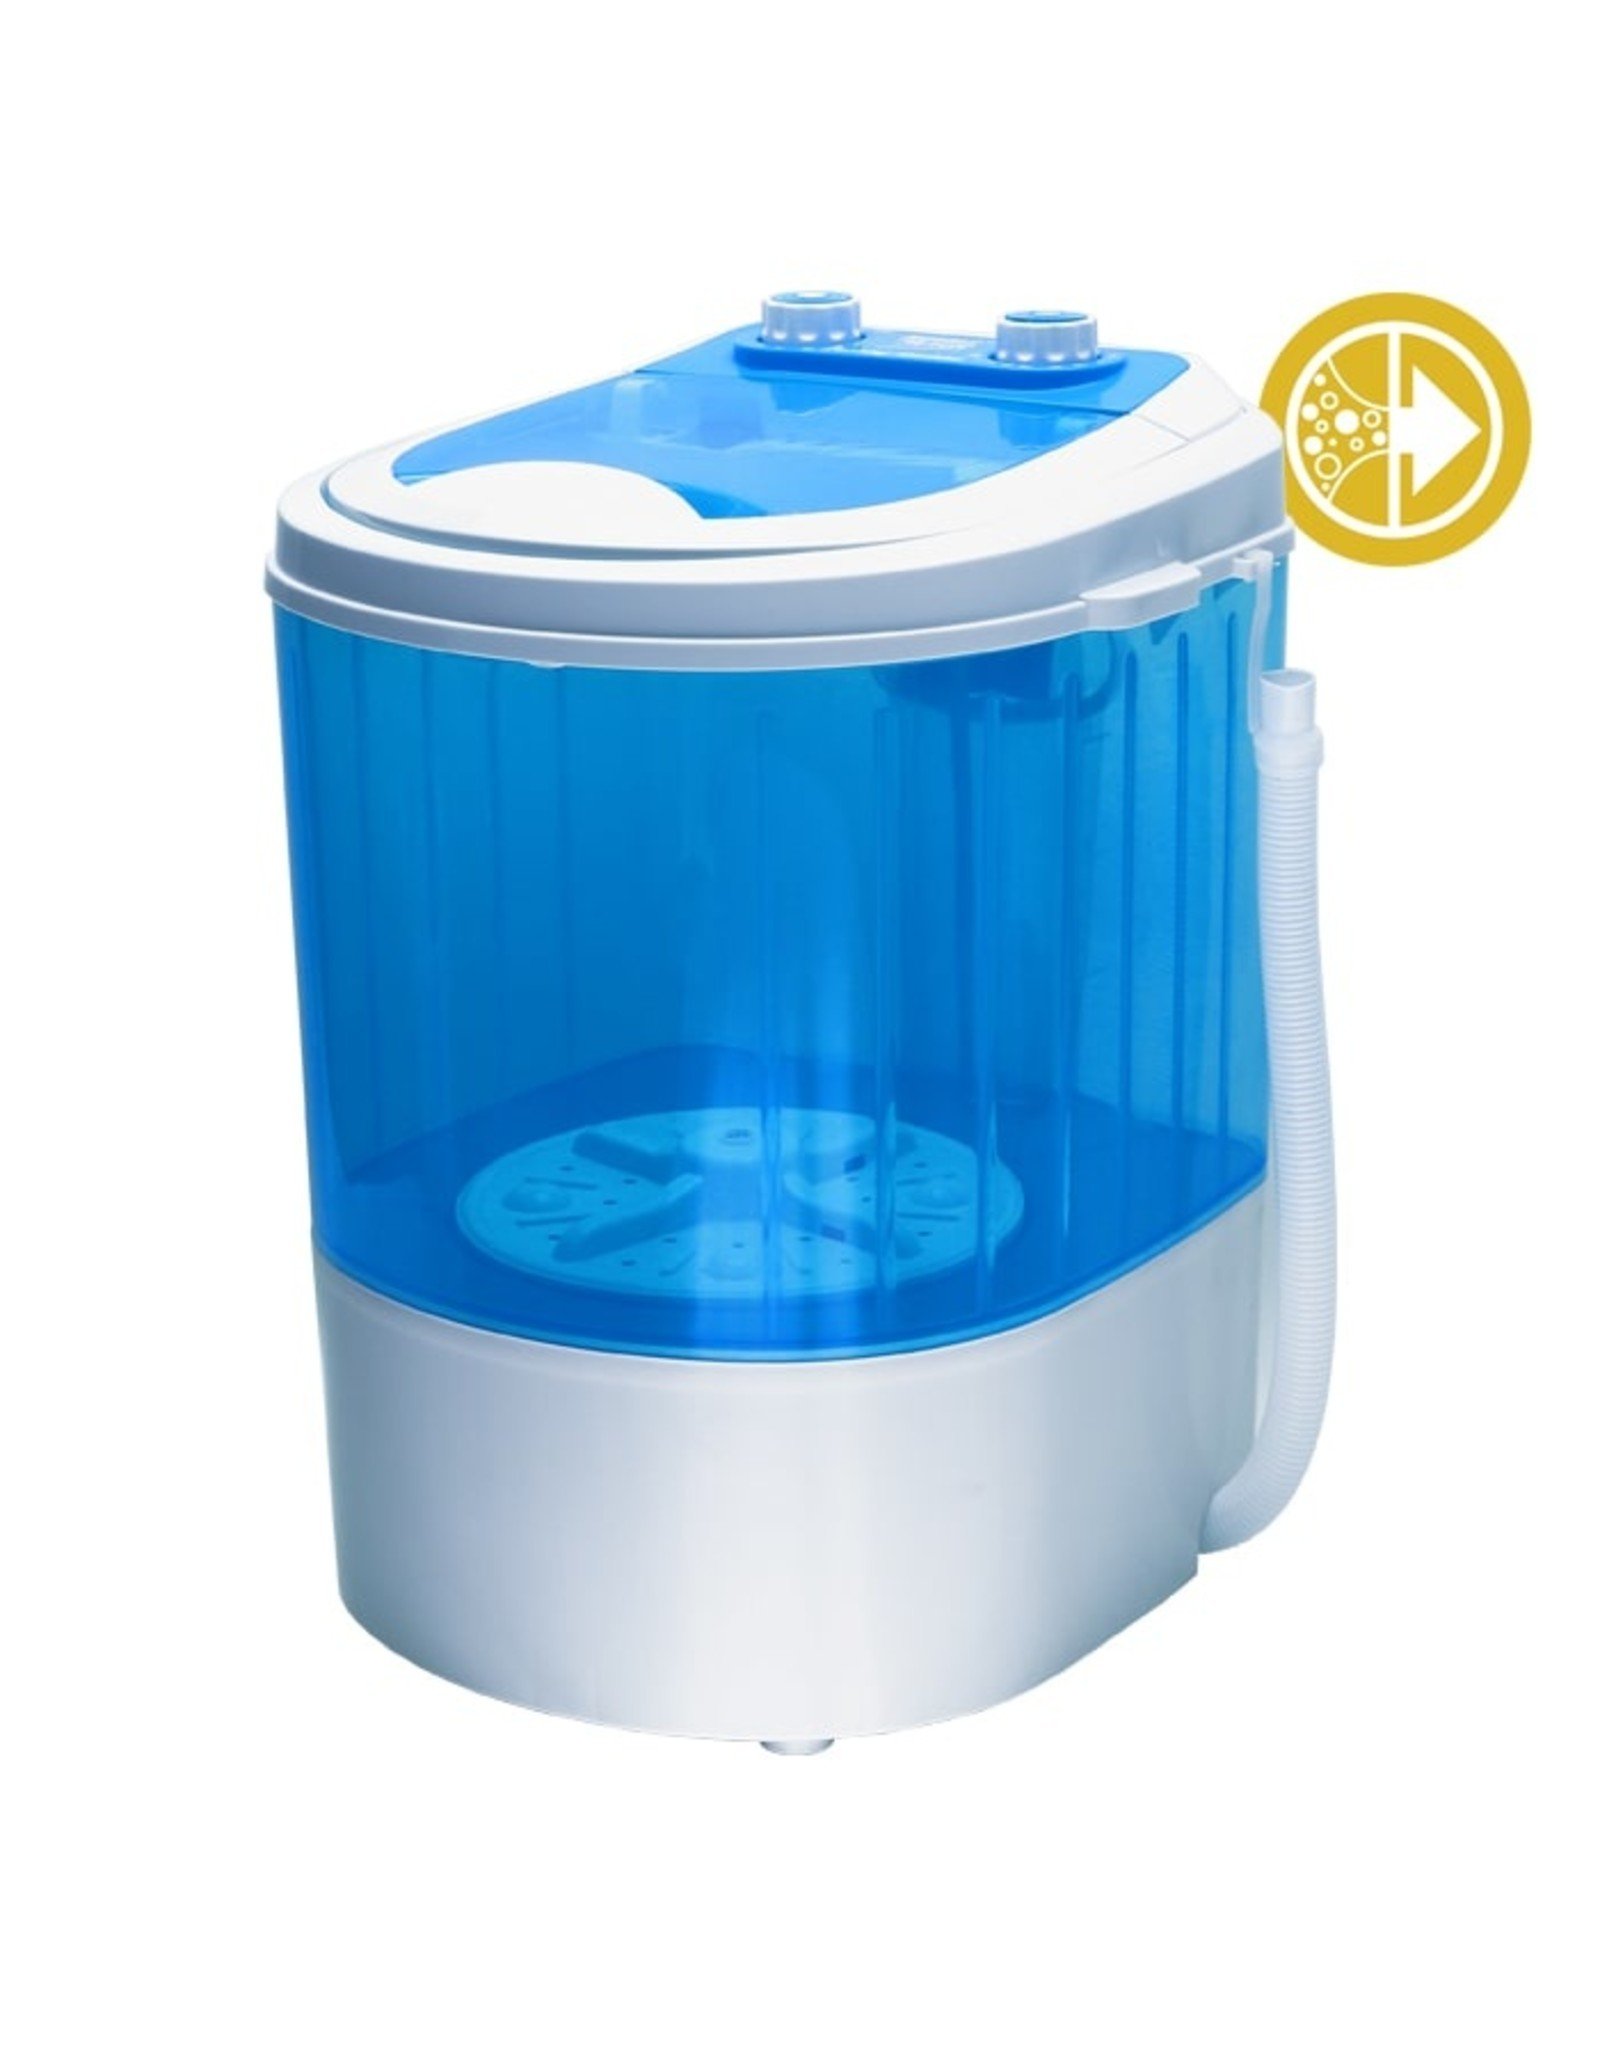 Bubble Magic 5 Gallon Washing Machine - Brew & Grow Hydroponics and  Homebrewing Supplies of Chicagoland